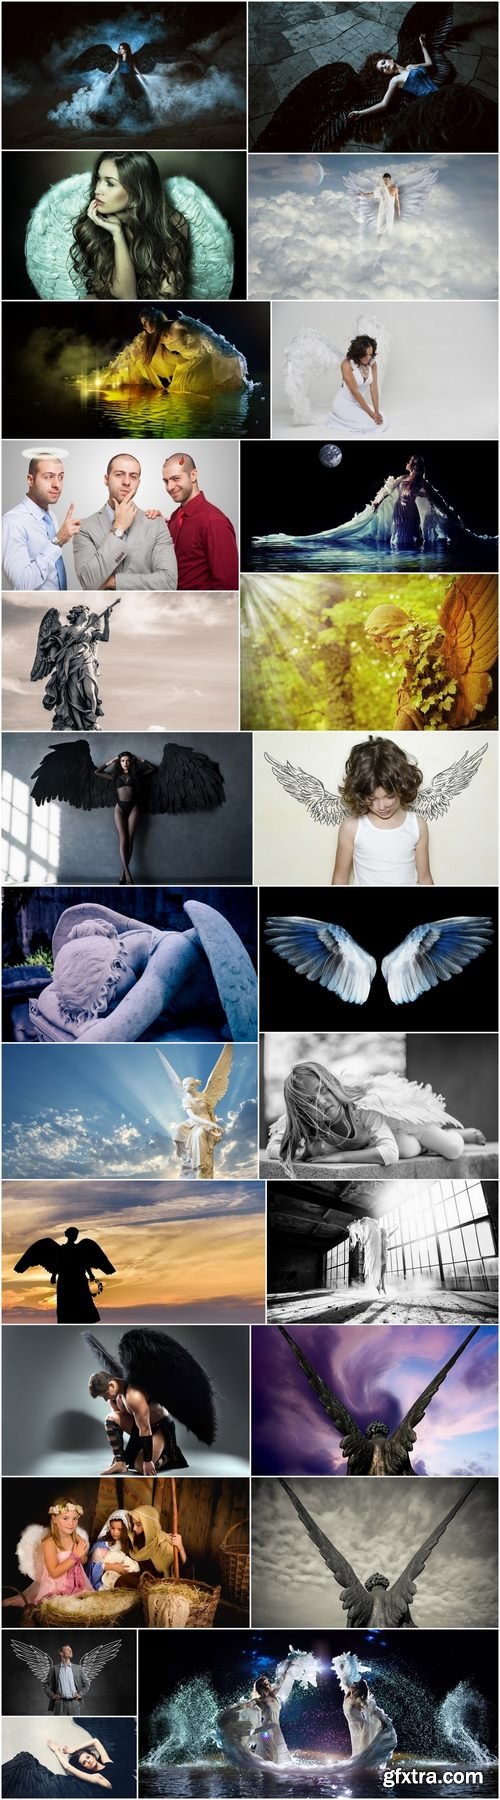 Angel wings wing conceptual illustration girl woman sculpture statue 25 HQ Jpeg